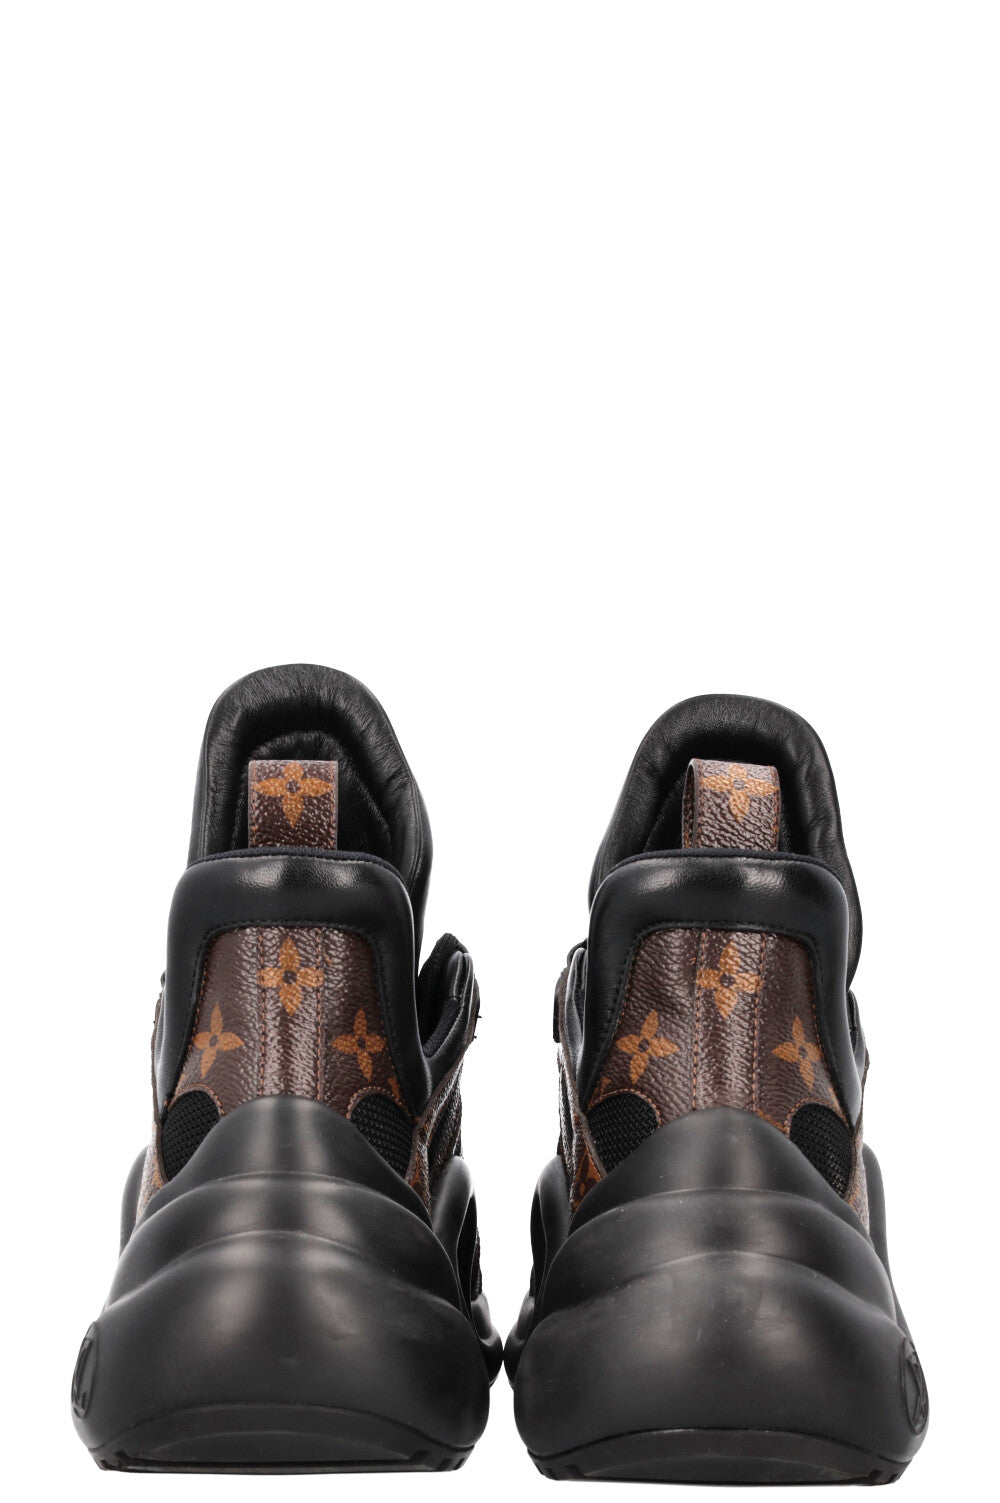 LOUIS VUITTON LV Archlight Sneakers MNG Black